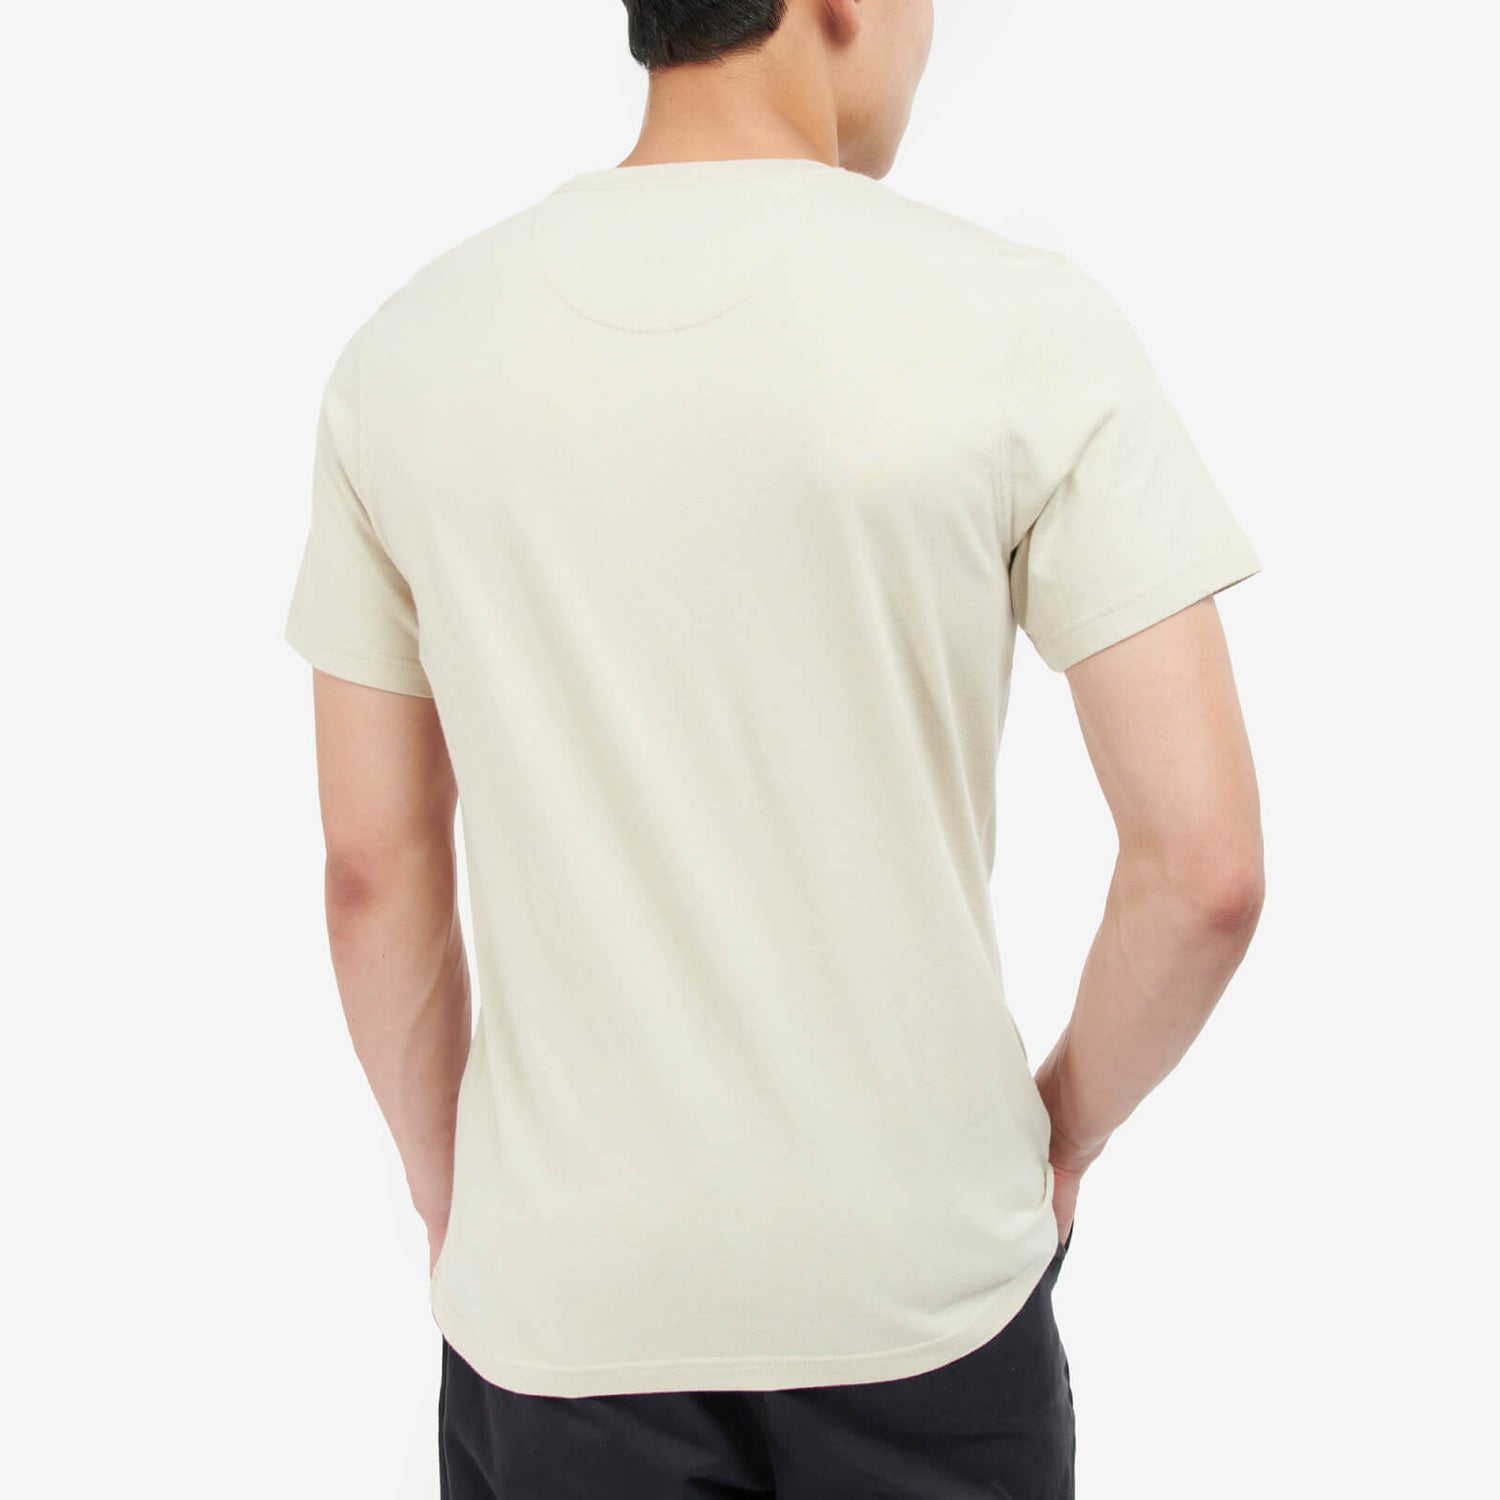 Barbour Heritage Cotton Essential Sports T-Shirt - S